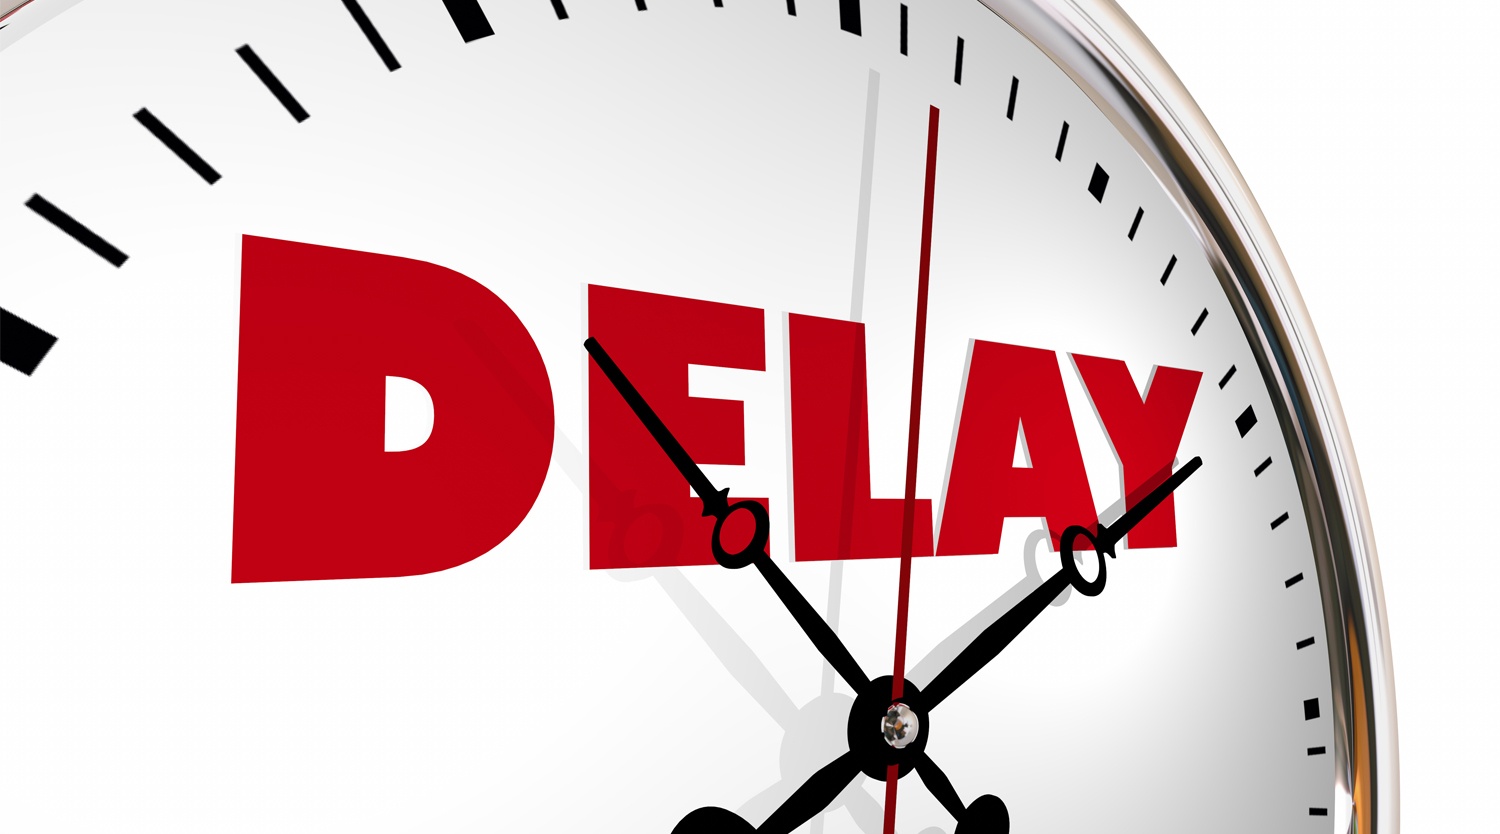 5 Work Management Tips to Avoid Project Delays